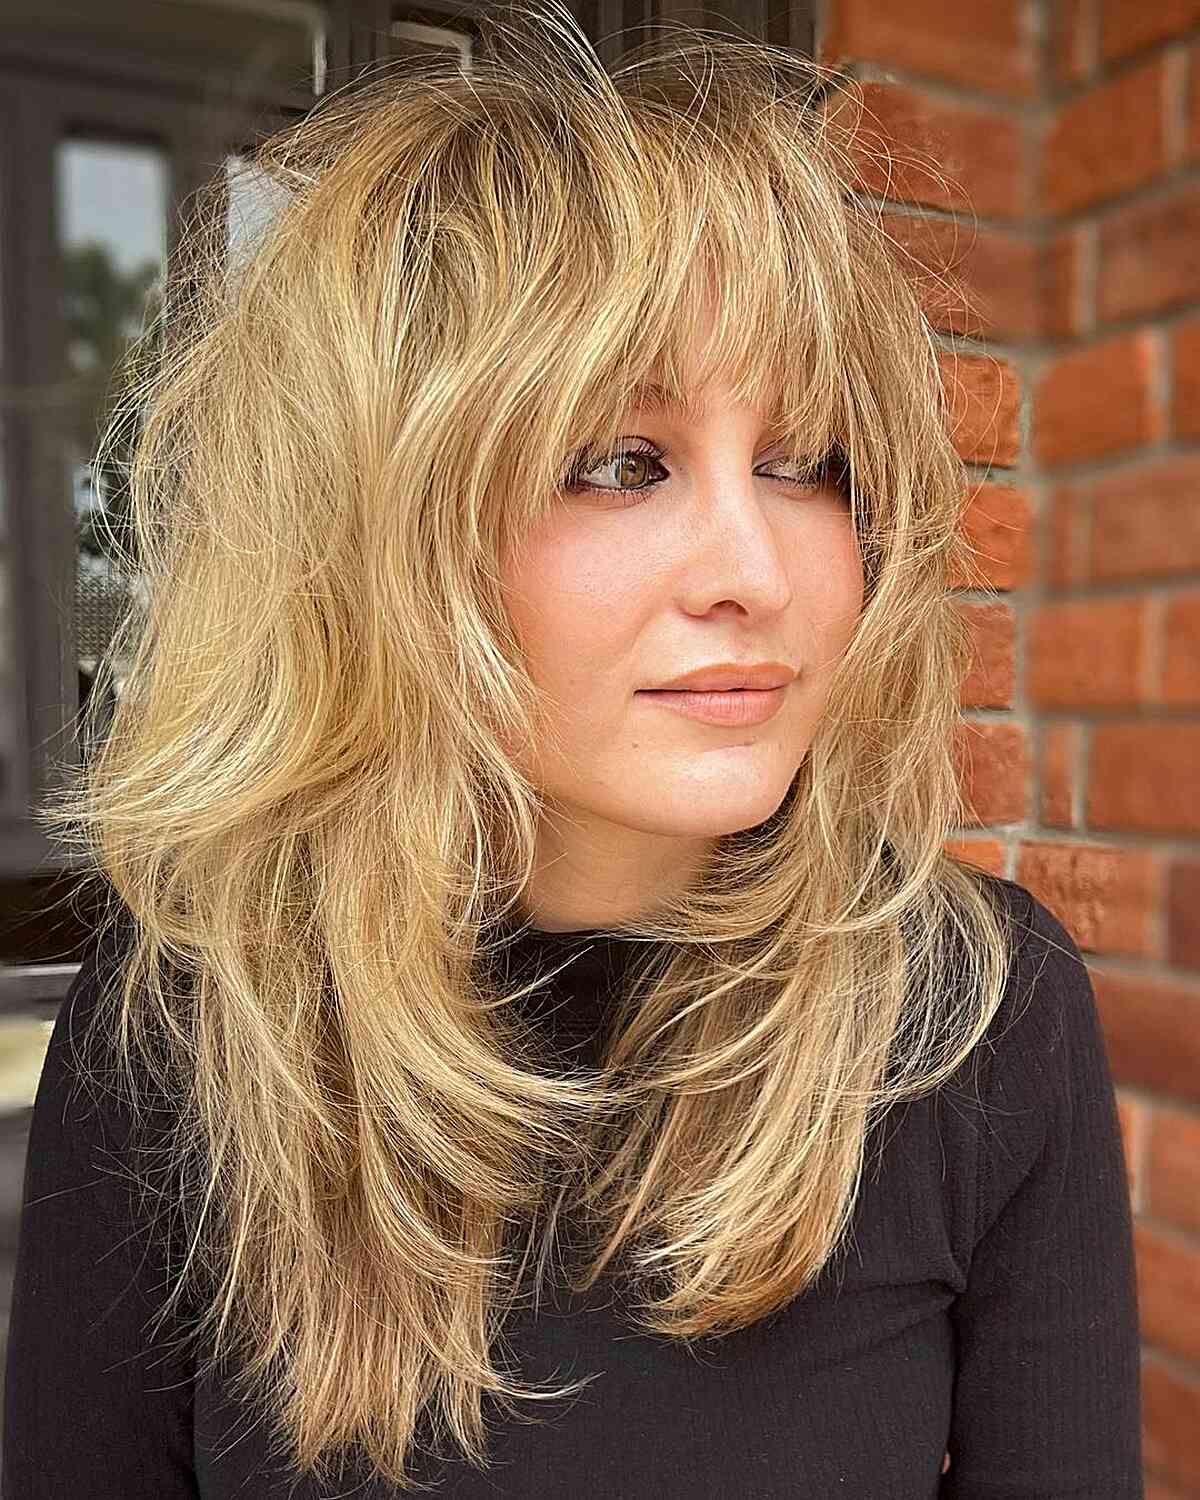 Medium-Length Shaggy Butterfly Cut with Bangs for ladies with textured hair